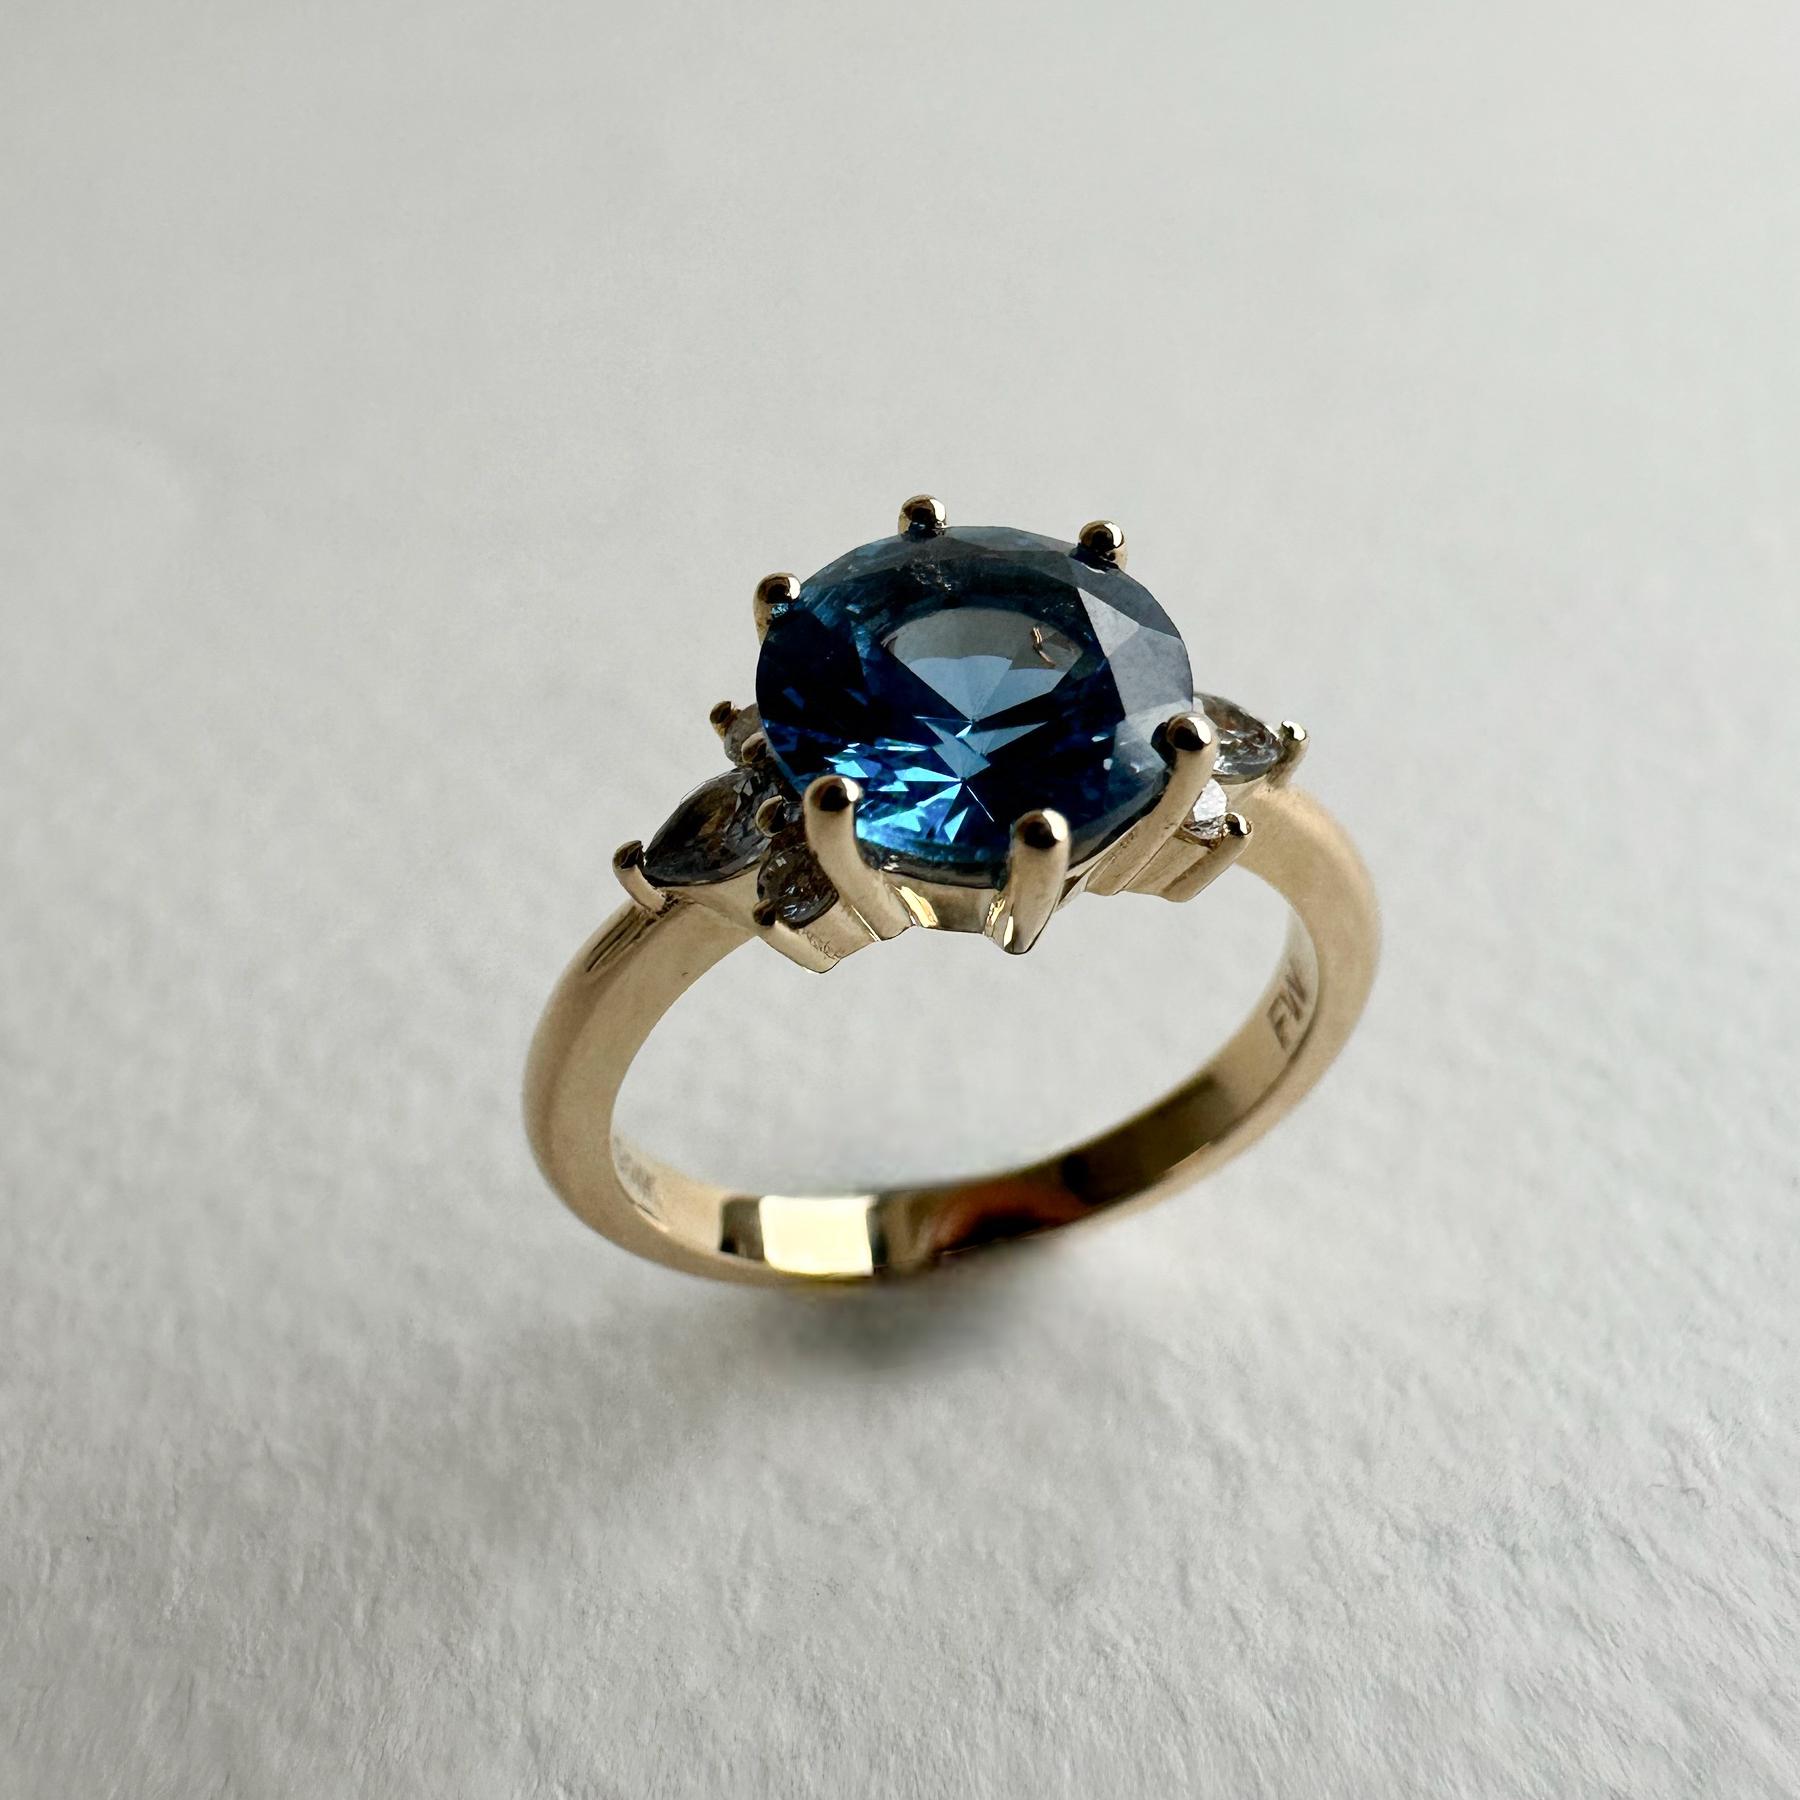 2 Carat Round Sapphire with Accenting Pear Cut and Round Diamonds 